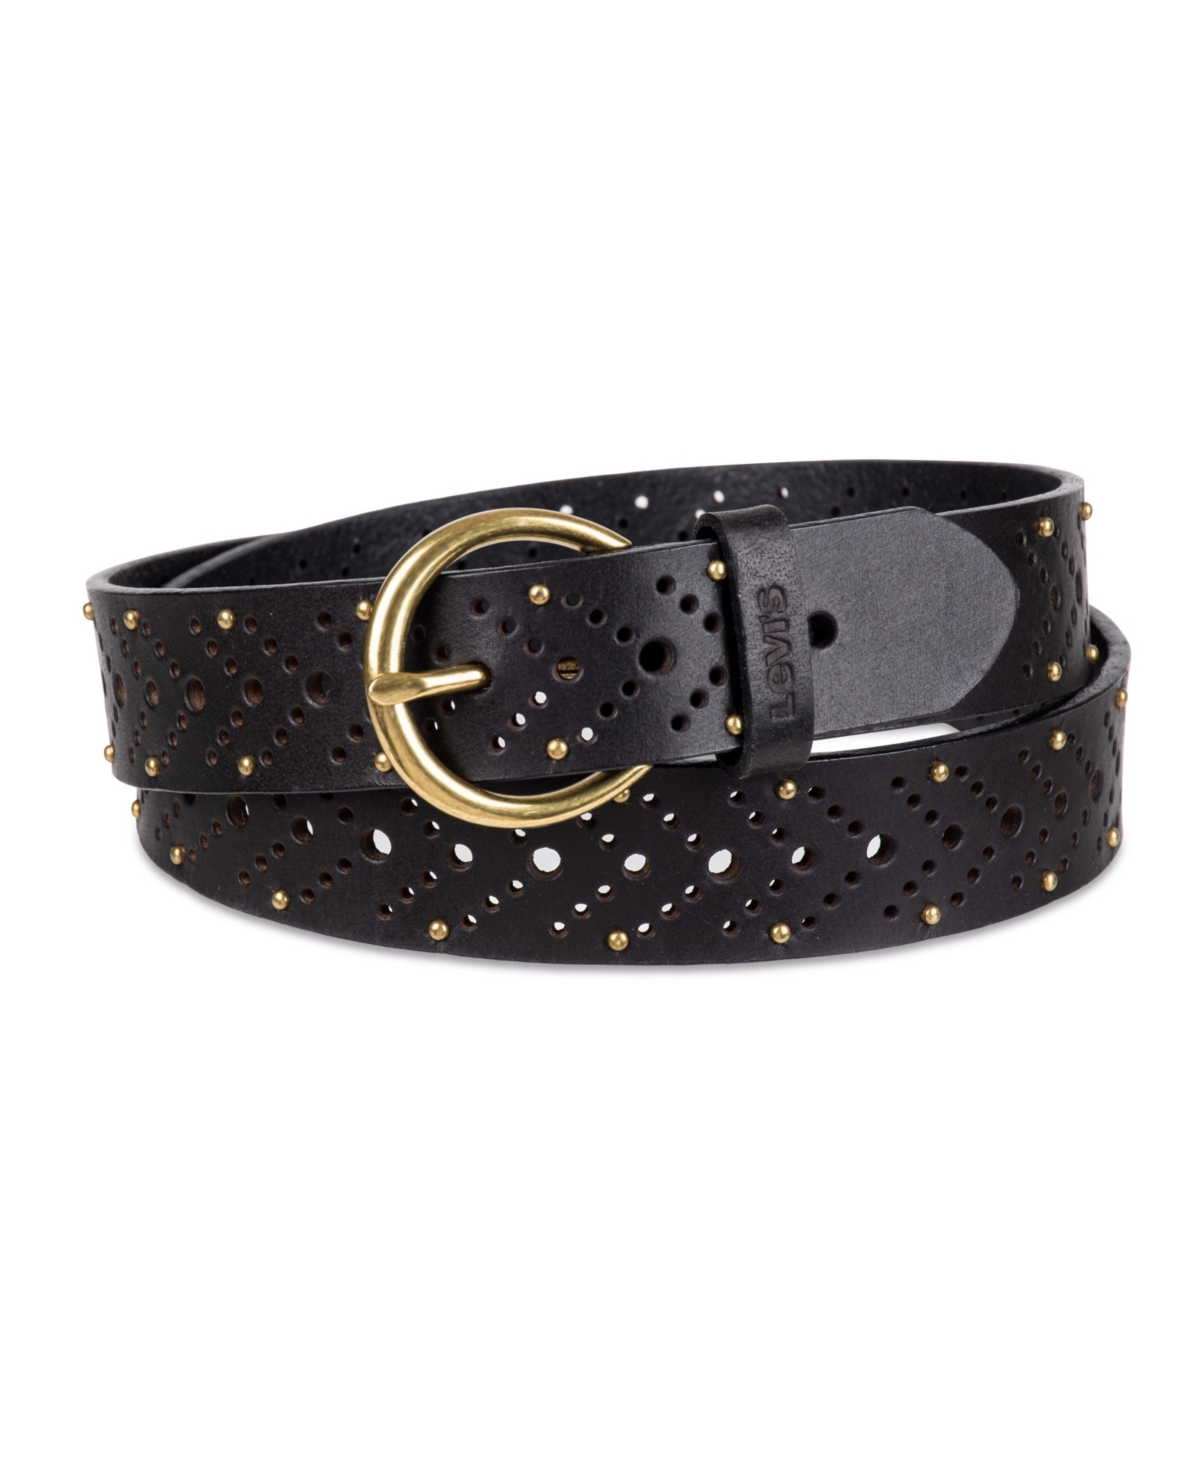 Women's Studded Fully Adjustable Perforated Leather Belt - Wheat